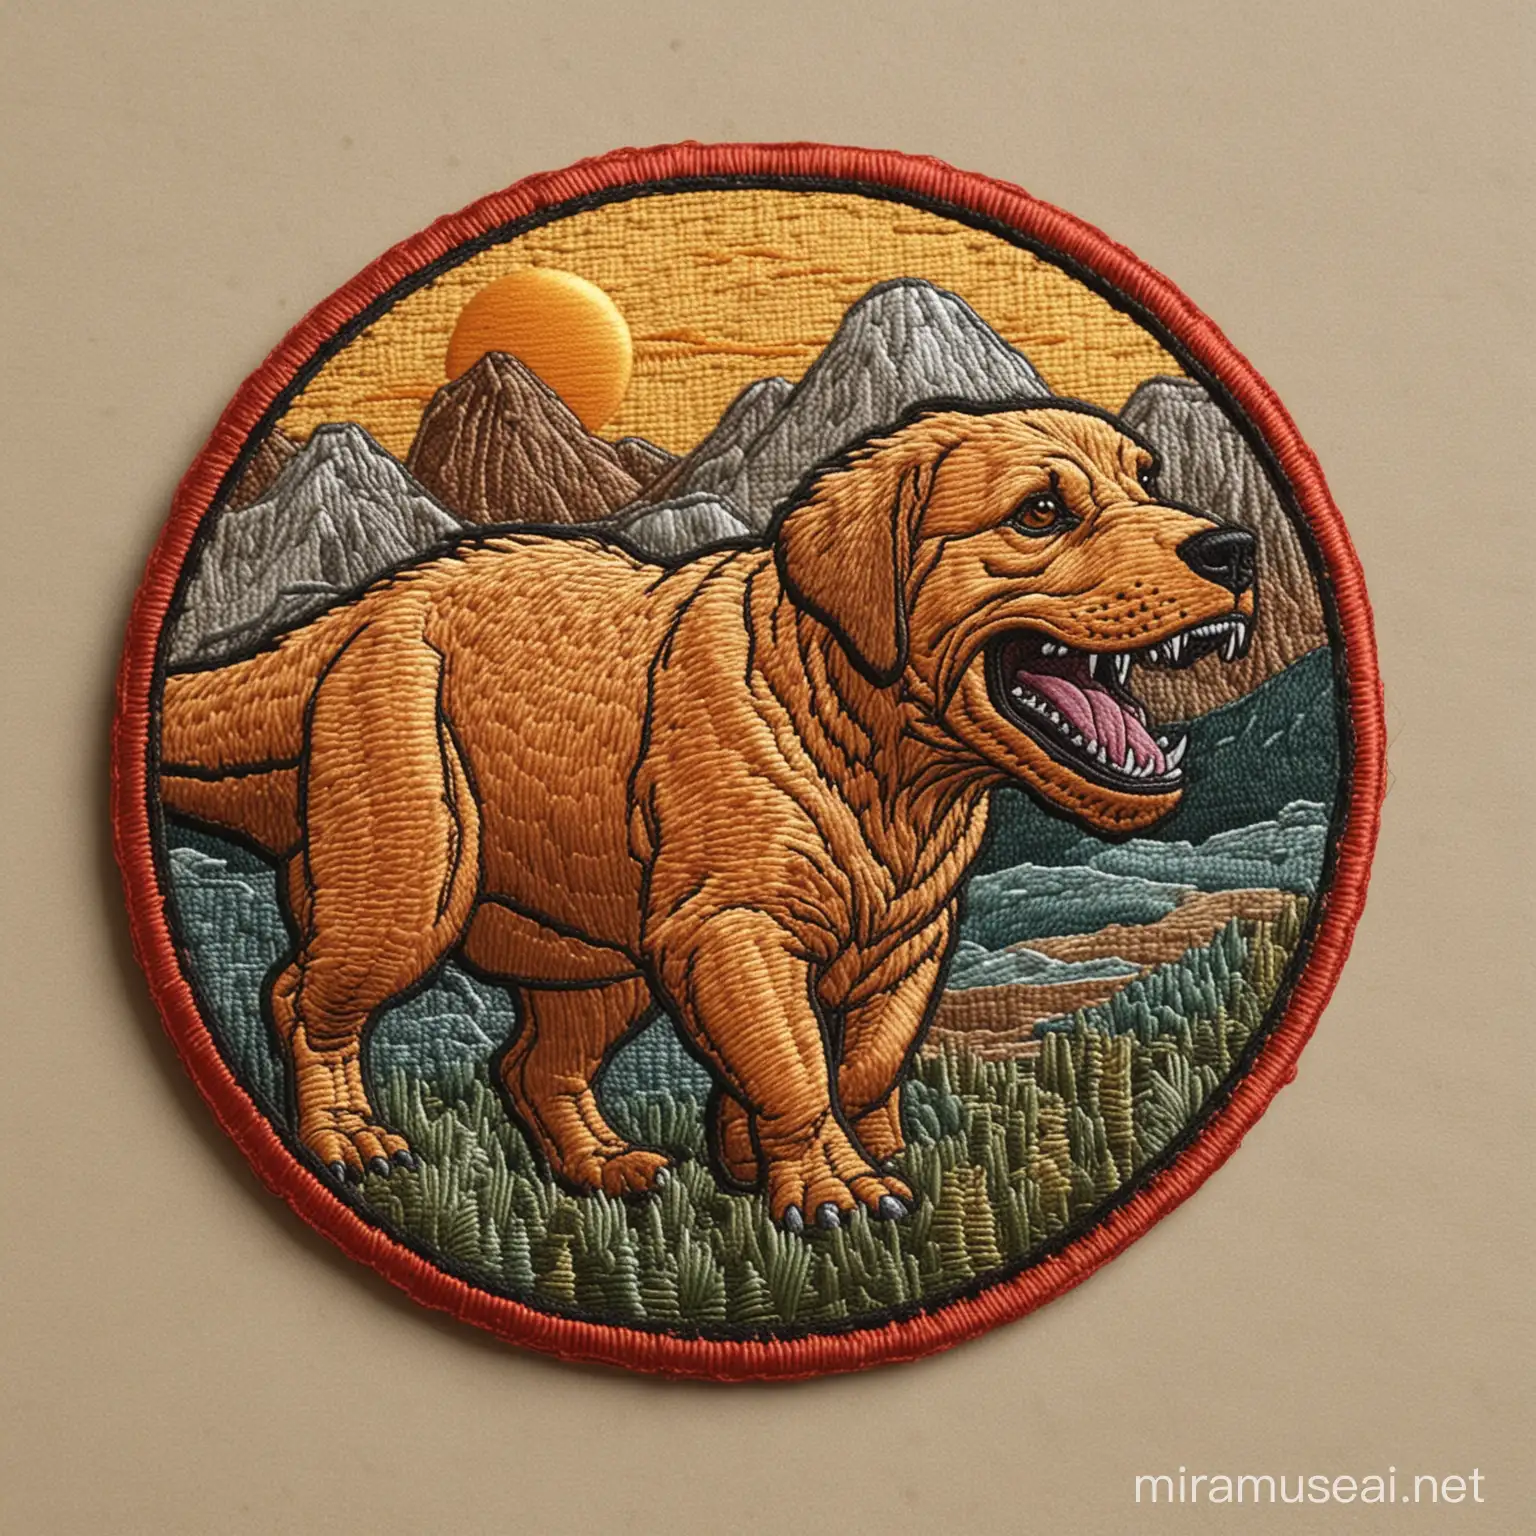 An embroidered patch, a Tyrannosaurus rex mixed with a golden retriever, thick lines, low detail, no shading -- ar 9:11 --v5